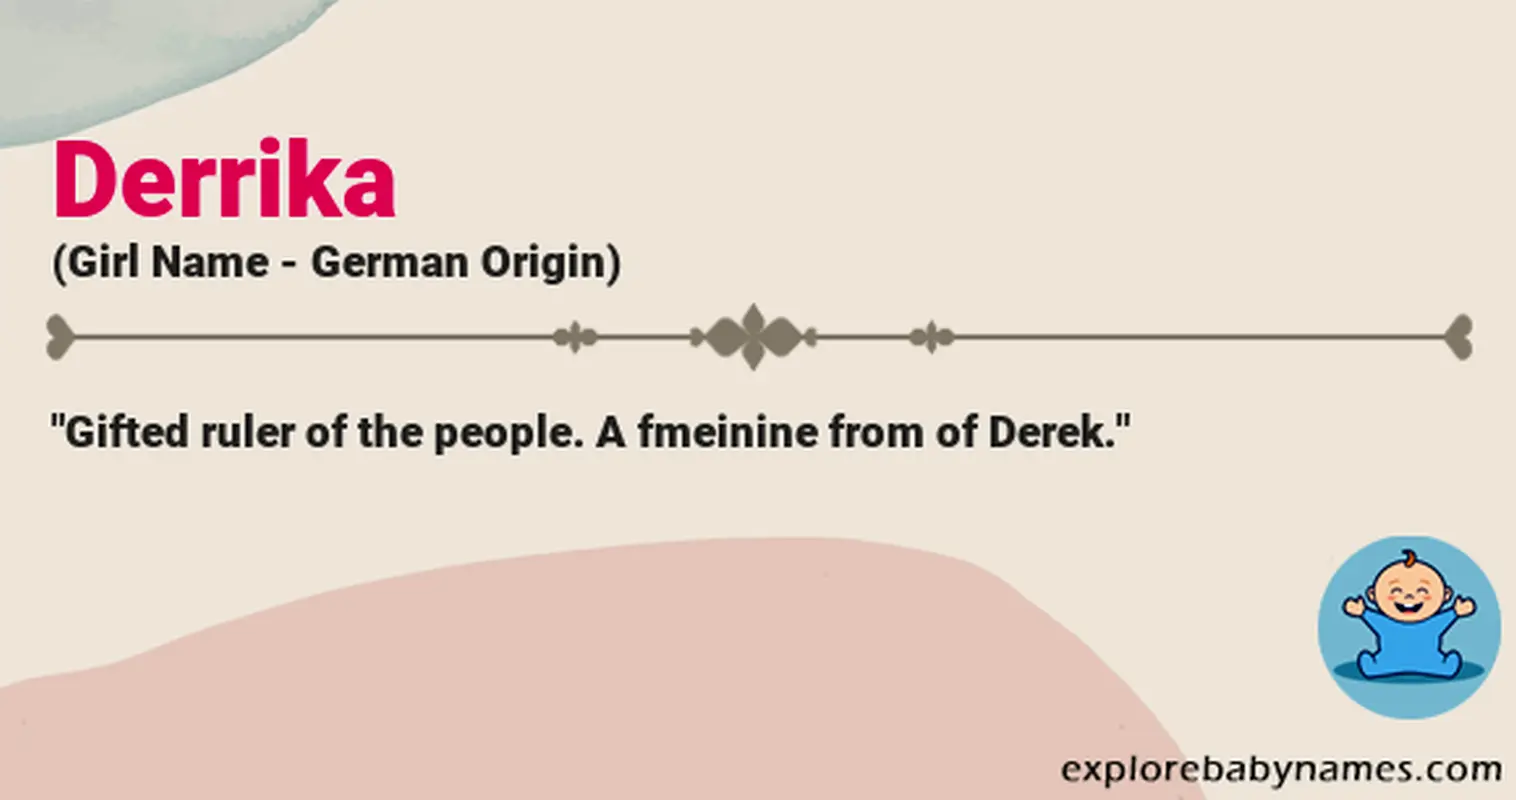 Meaning of Derrika